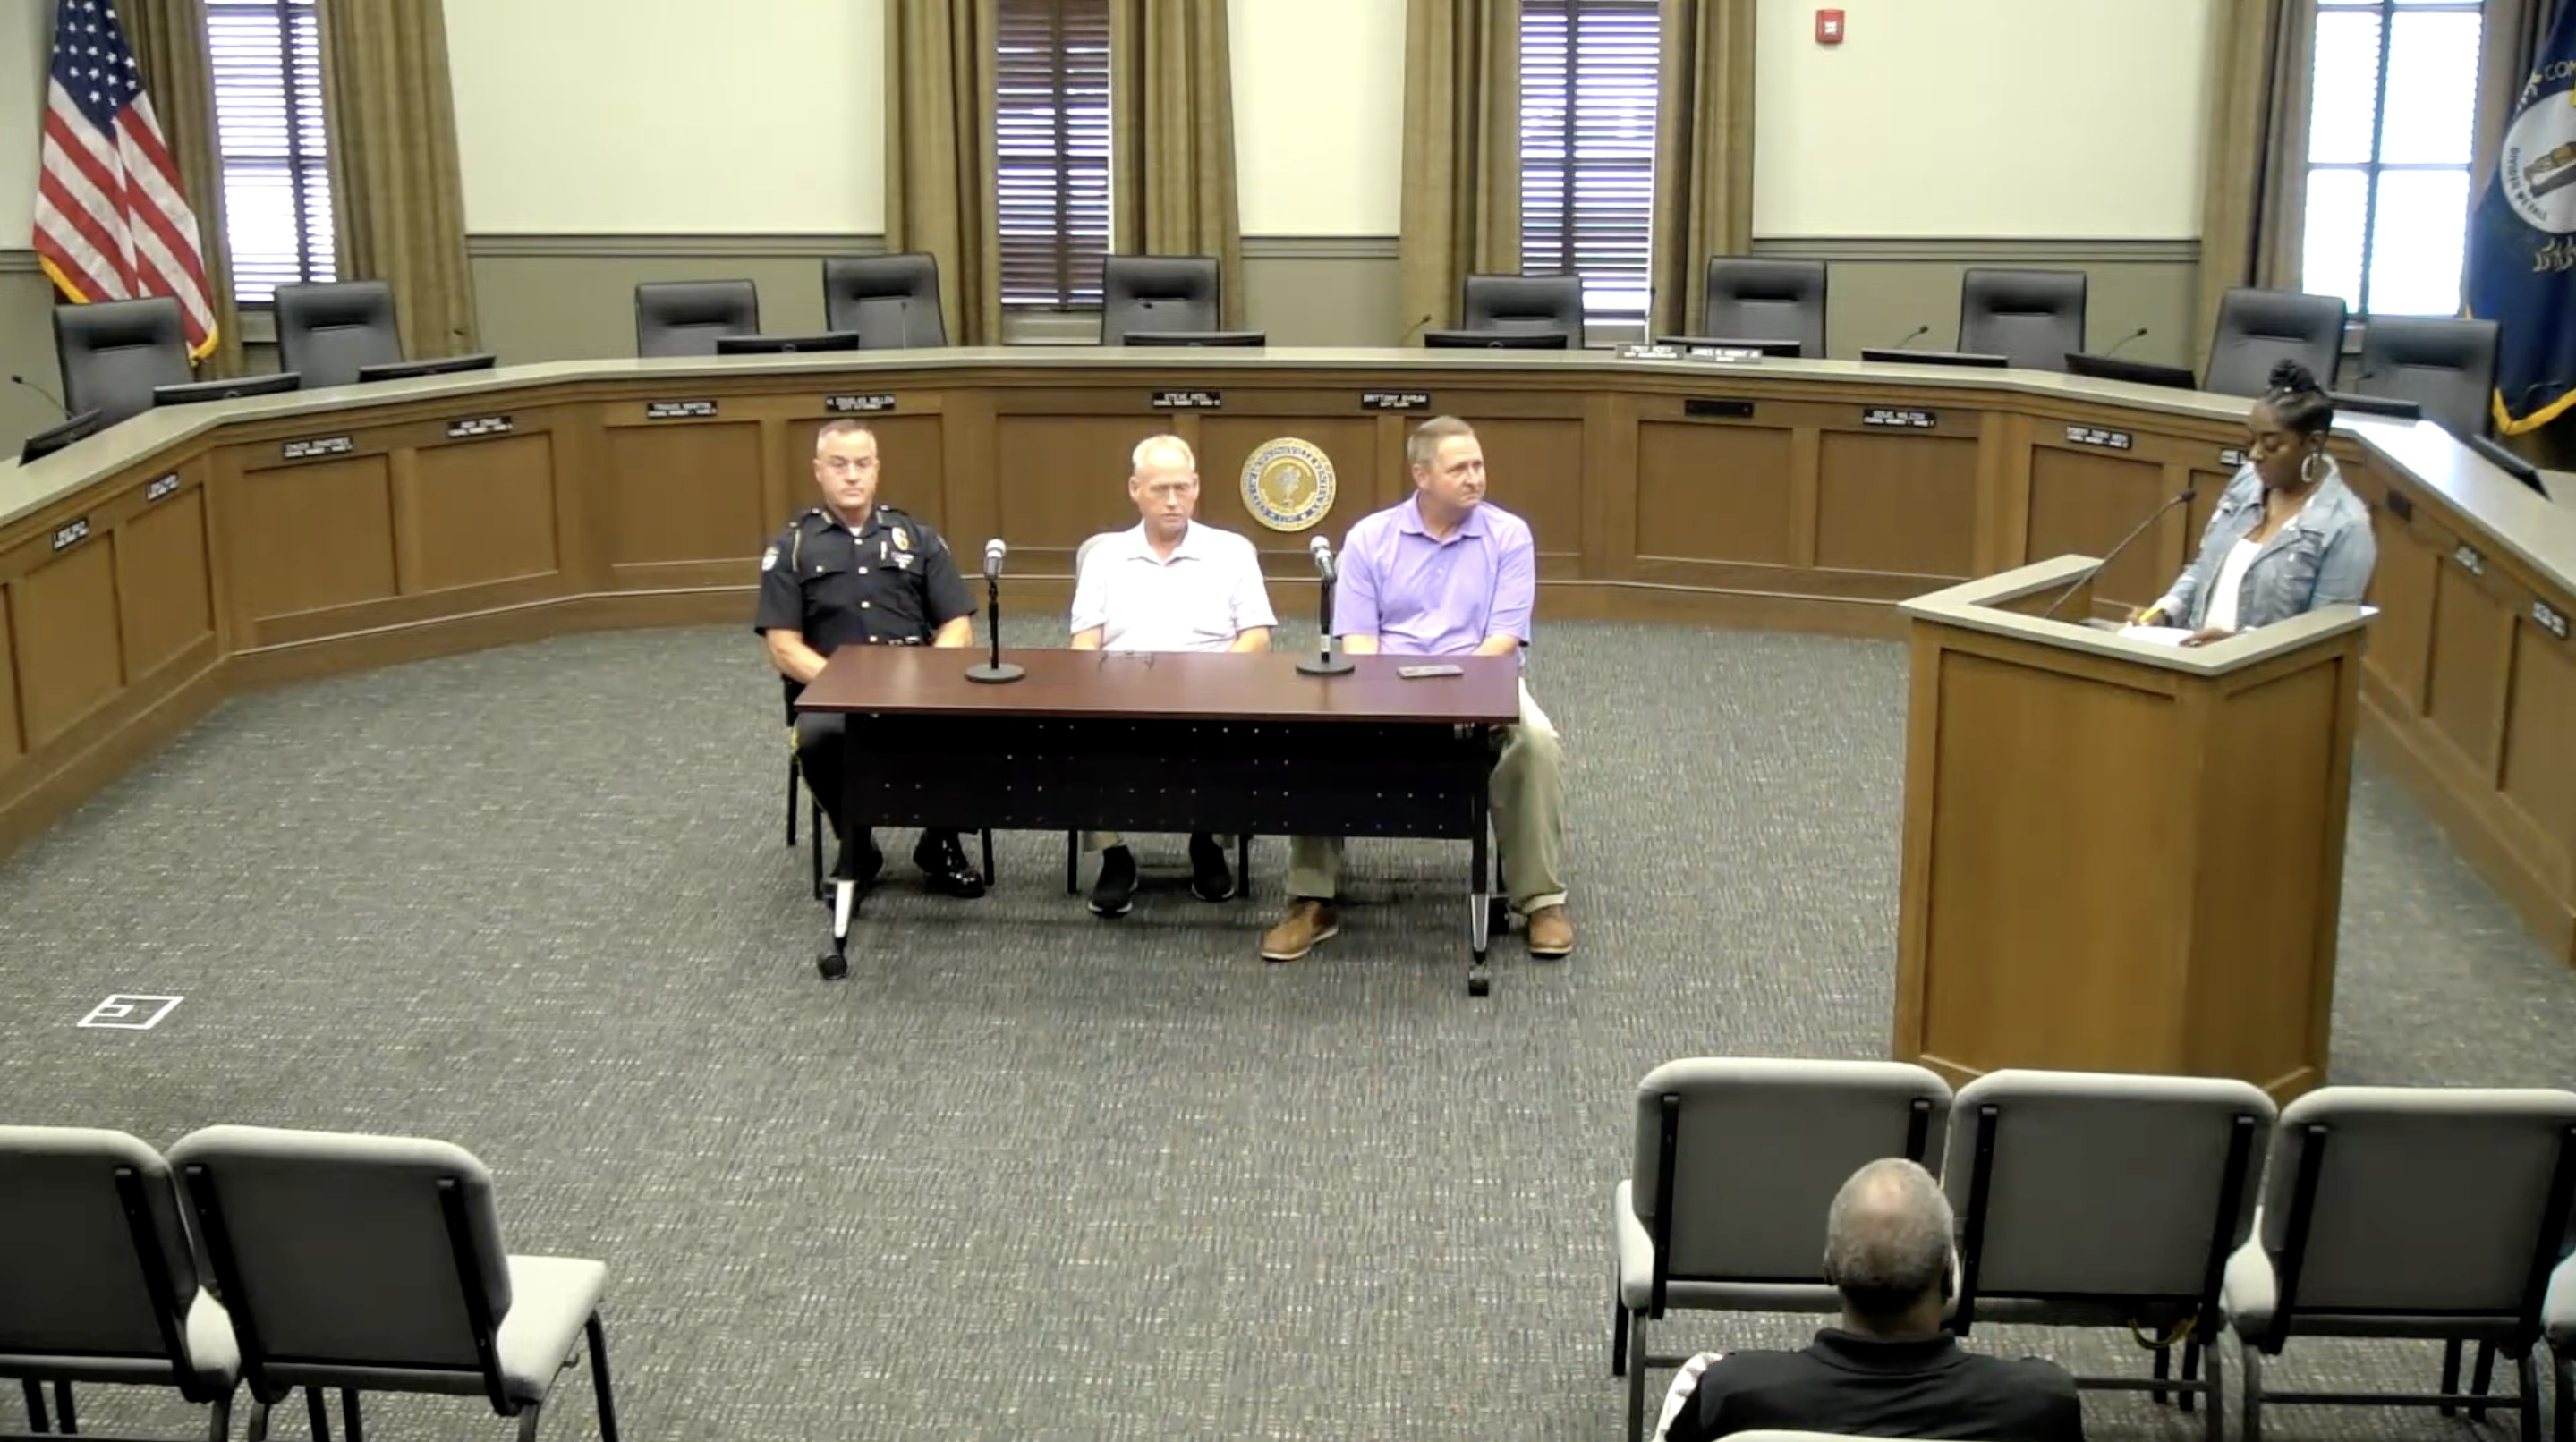 Hopkinsville police to undergo diversity training after video stirs controversy